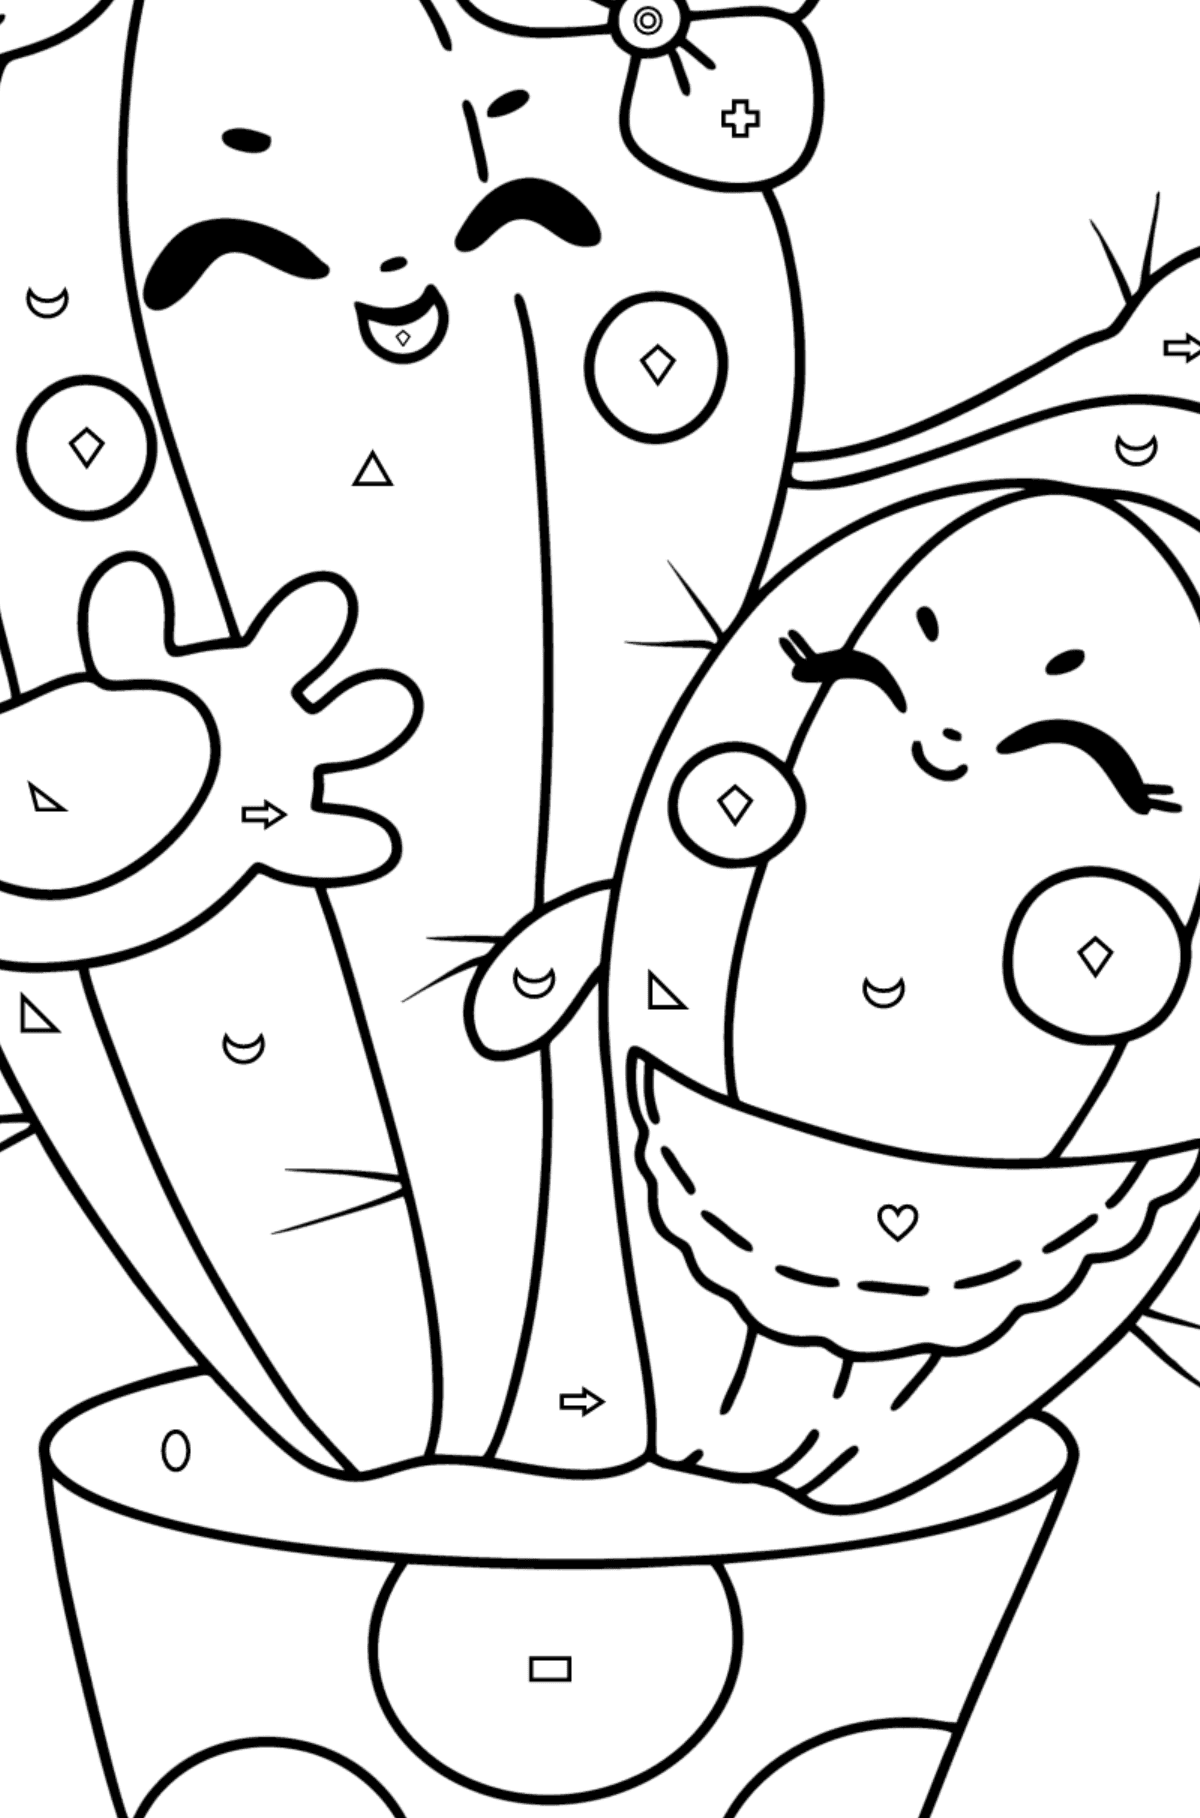 Cartoon Cactus coloring page - Coloring by Geometric Shapes for Kids